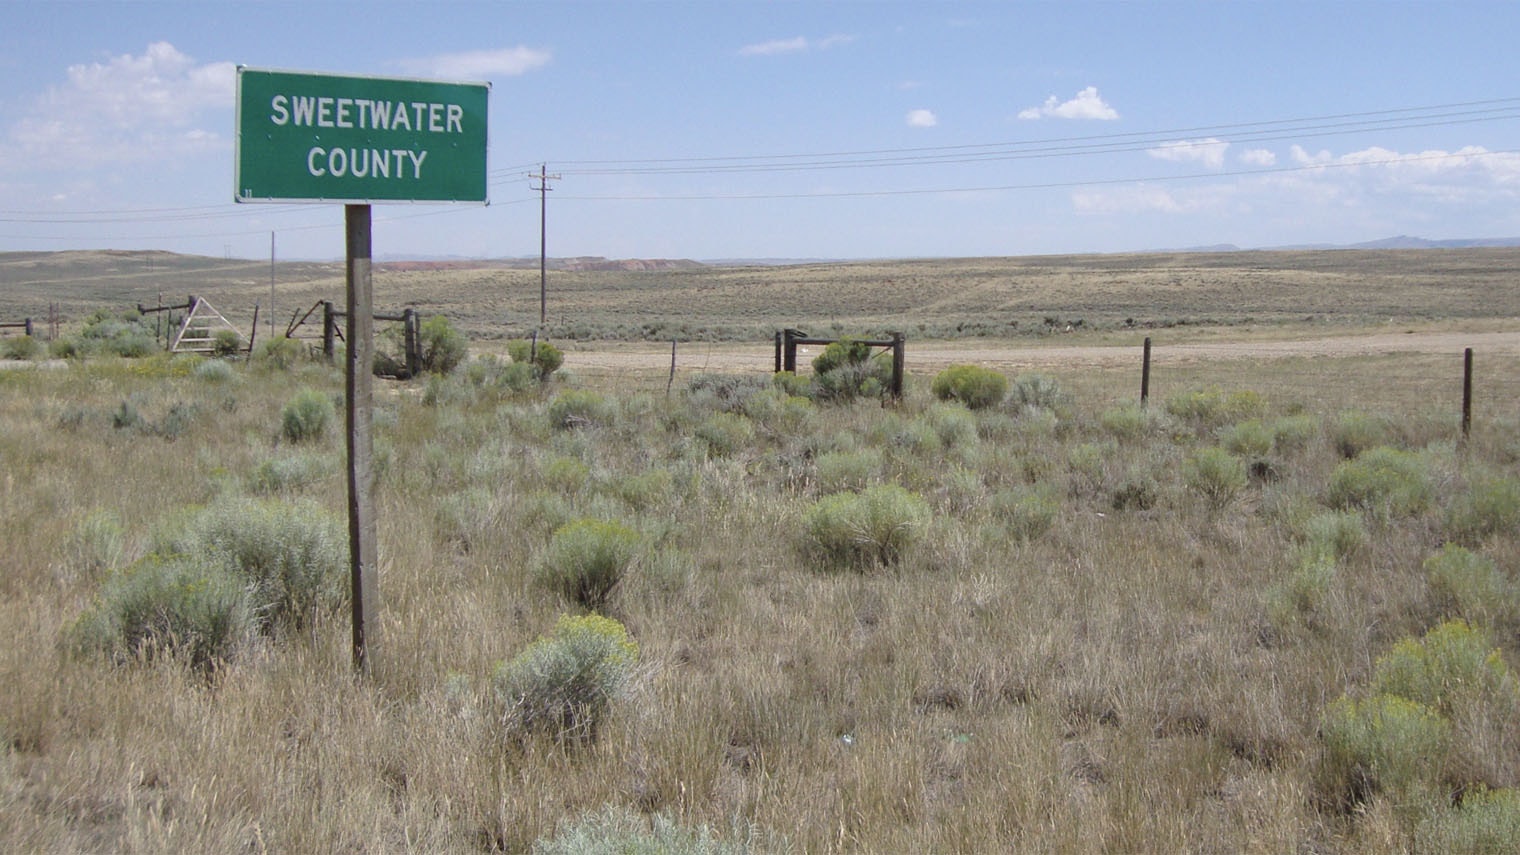 Sweetwater county sign